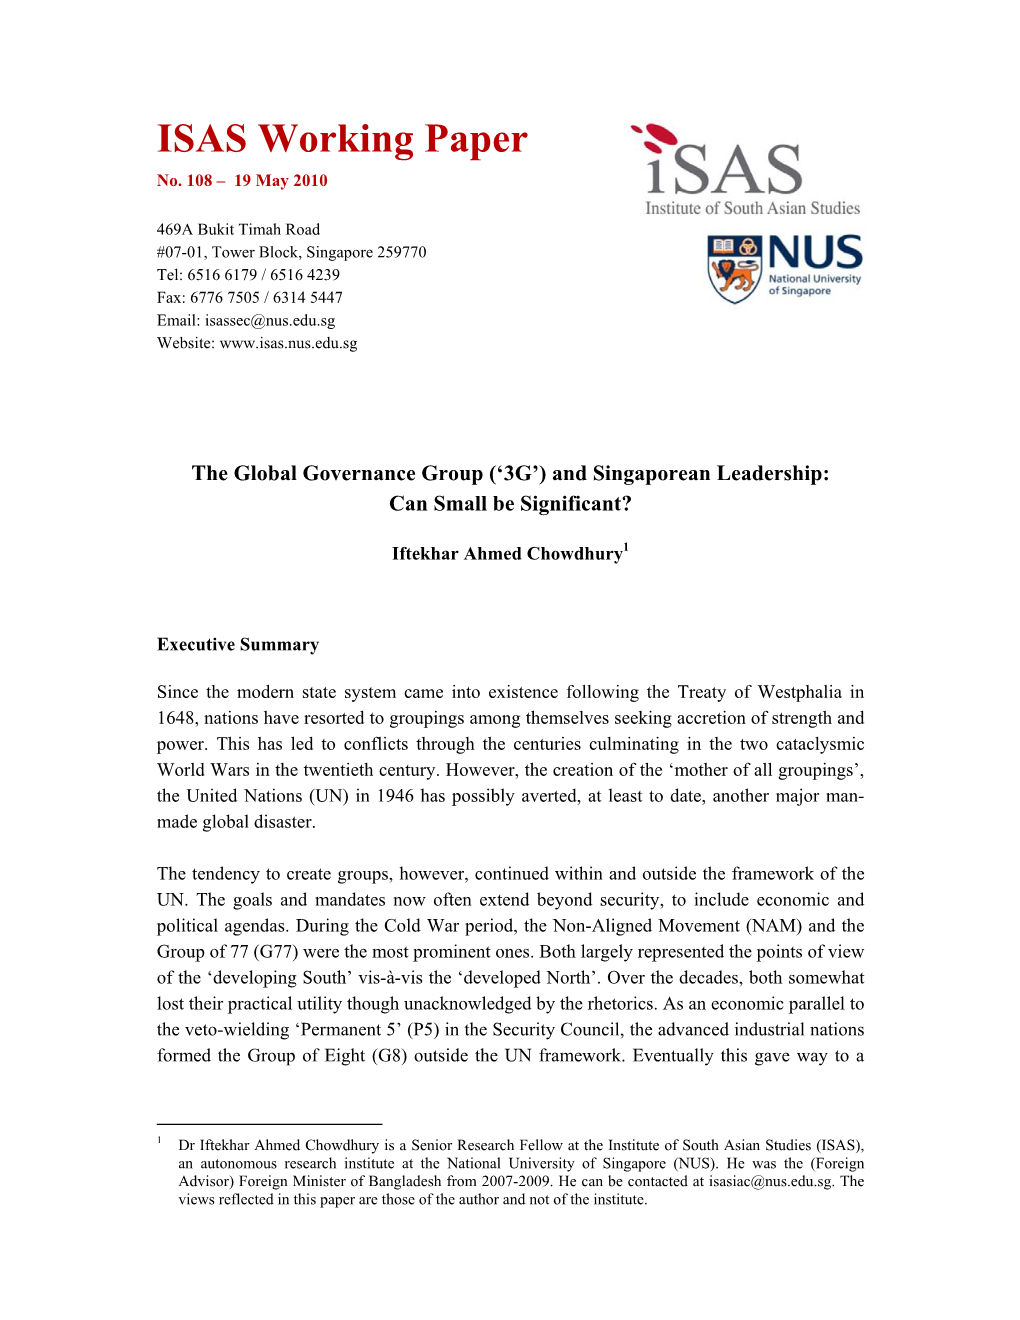 The Global Governance Group ('3G') and Singaporean Leadership: Can